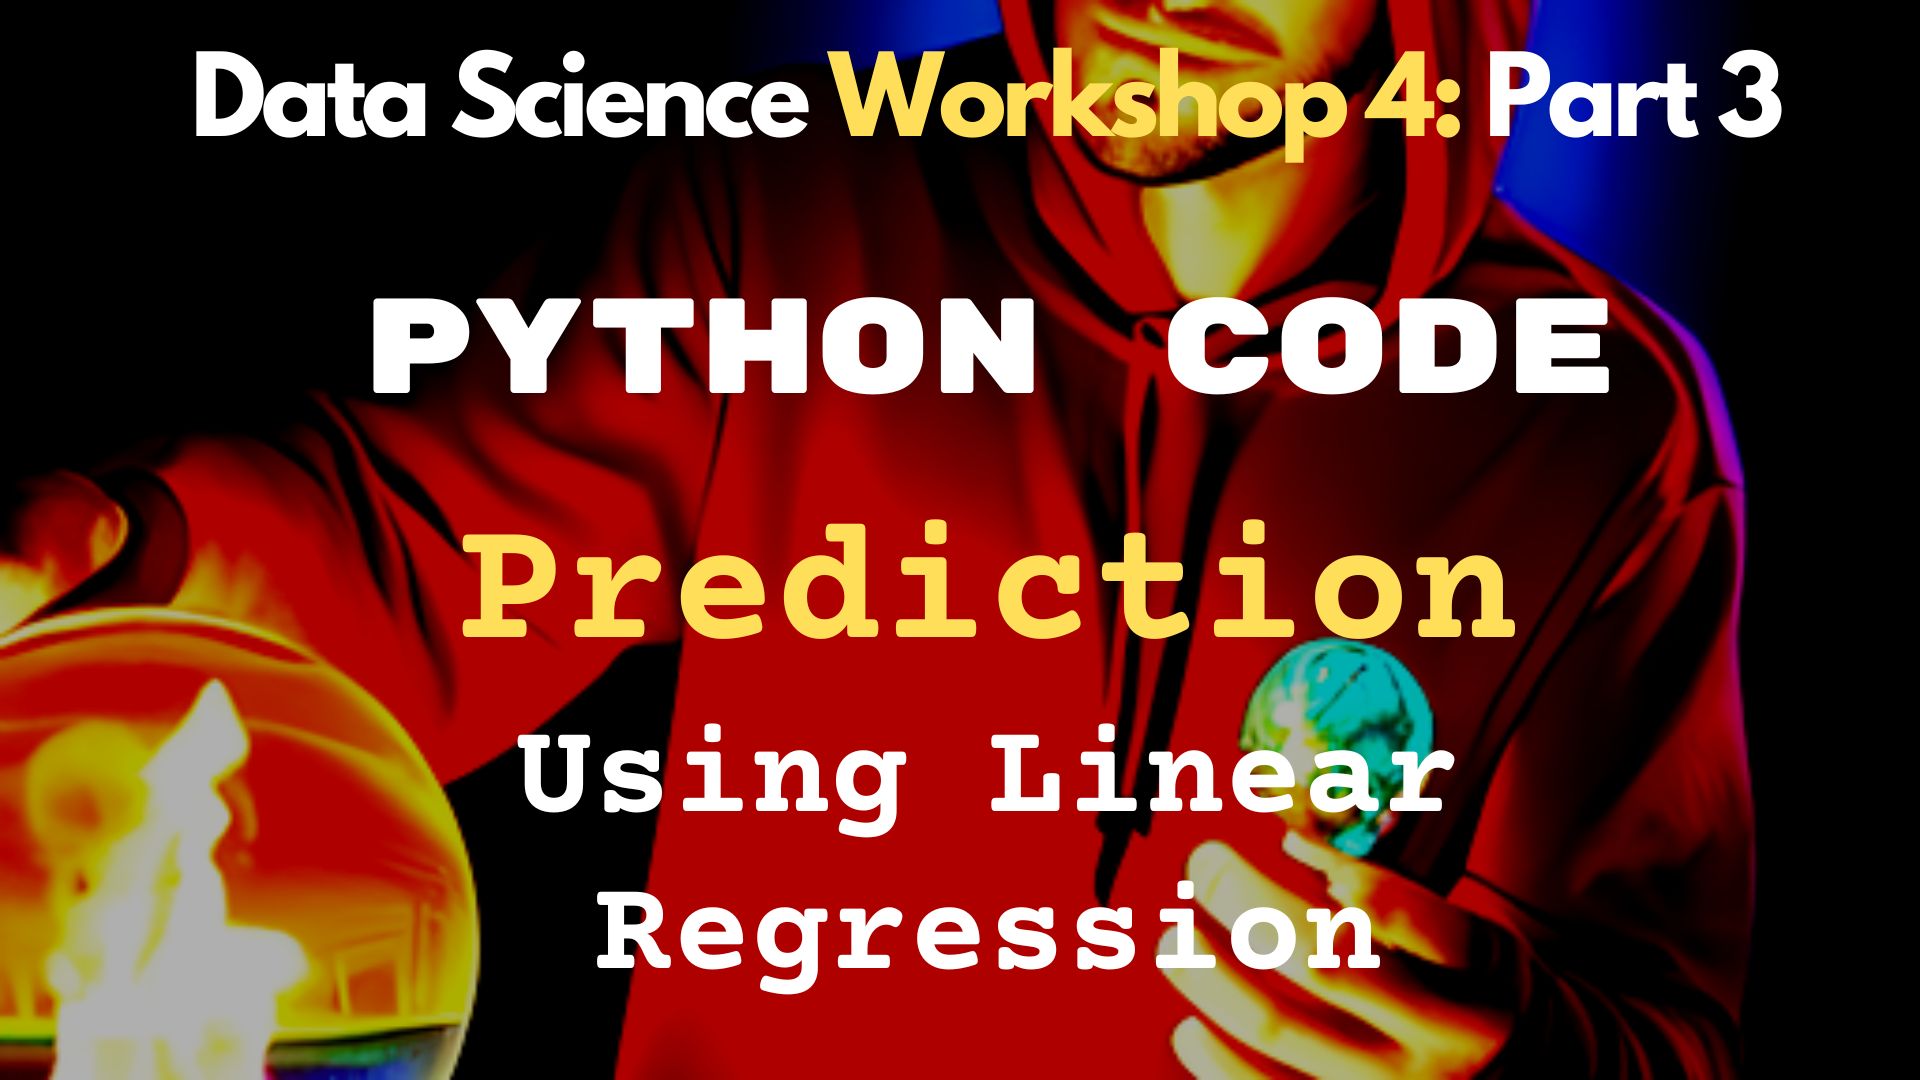 Data Science Workshop 4 (Part 3): (Continued) Python Code for Linear Regression